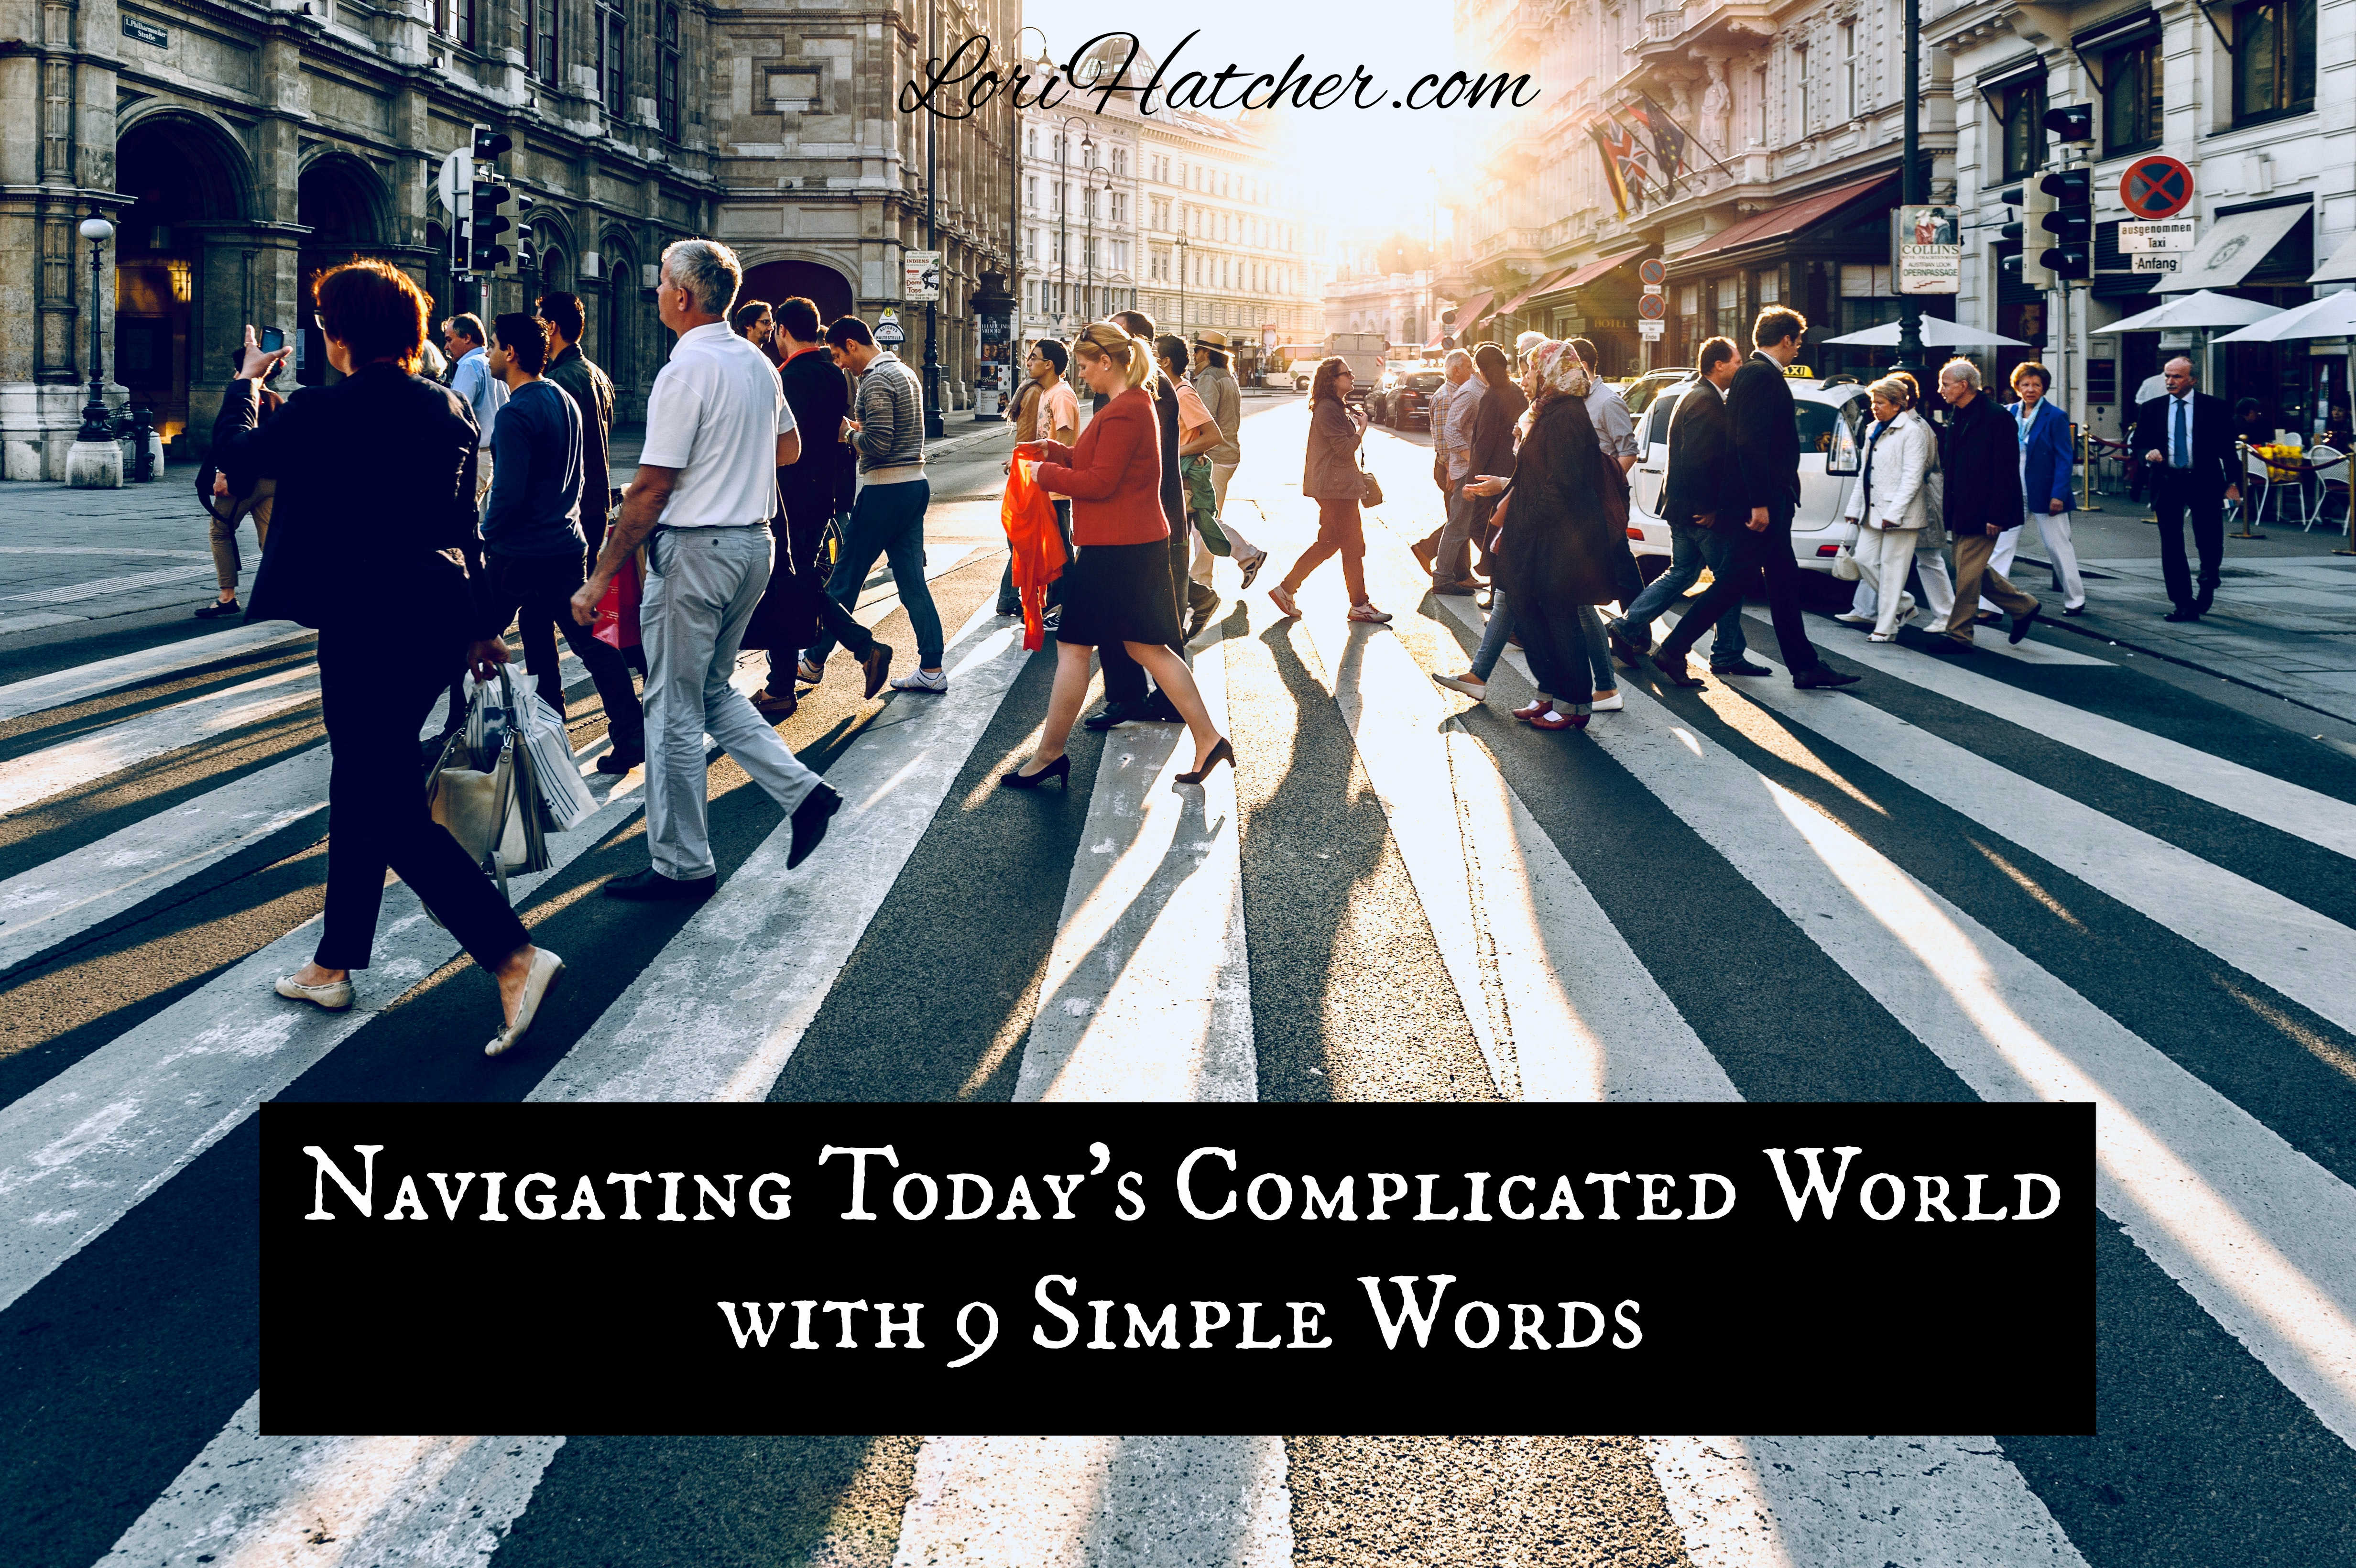 Navigating Today’s Complicated World with 9 Simple Words